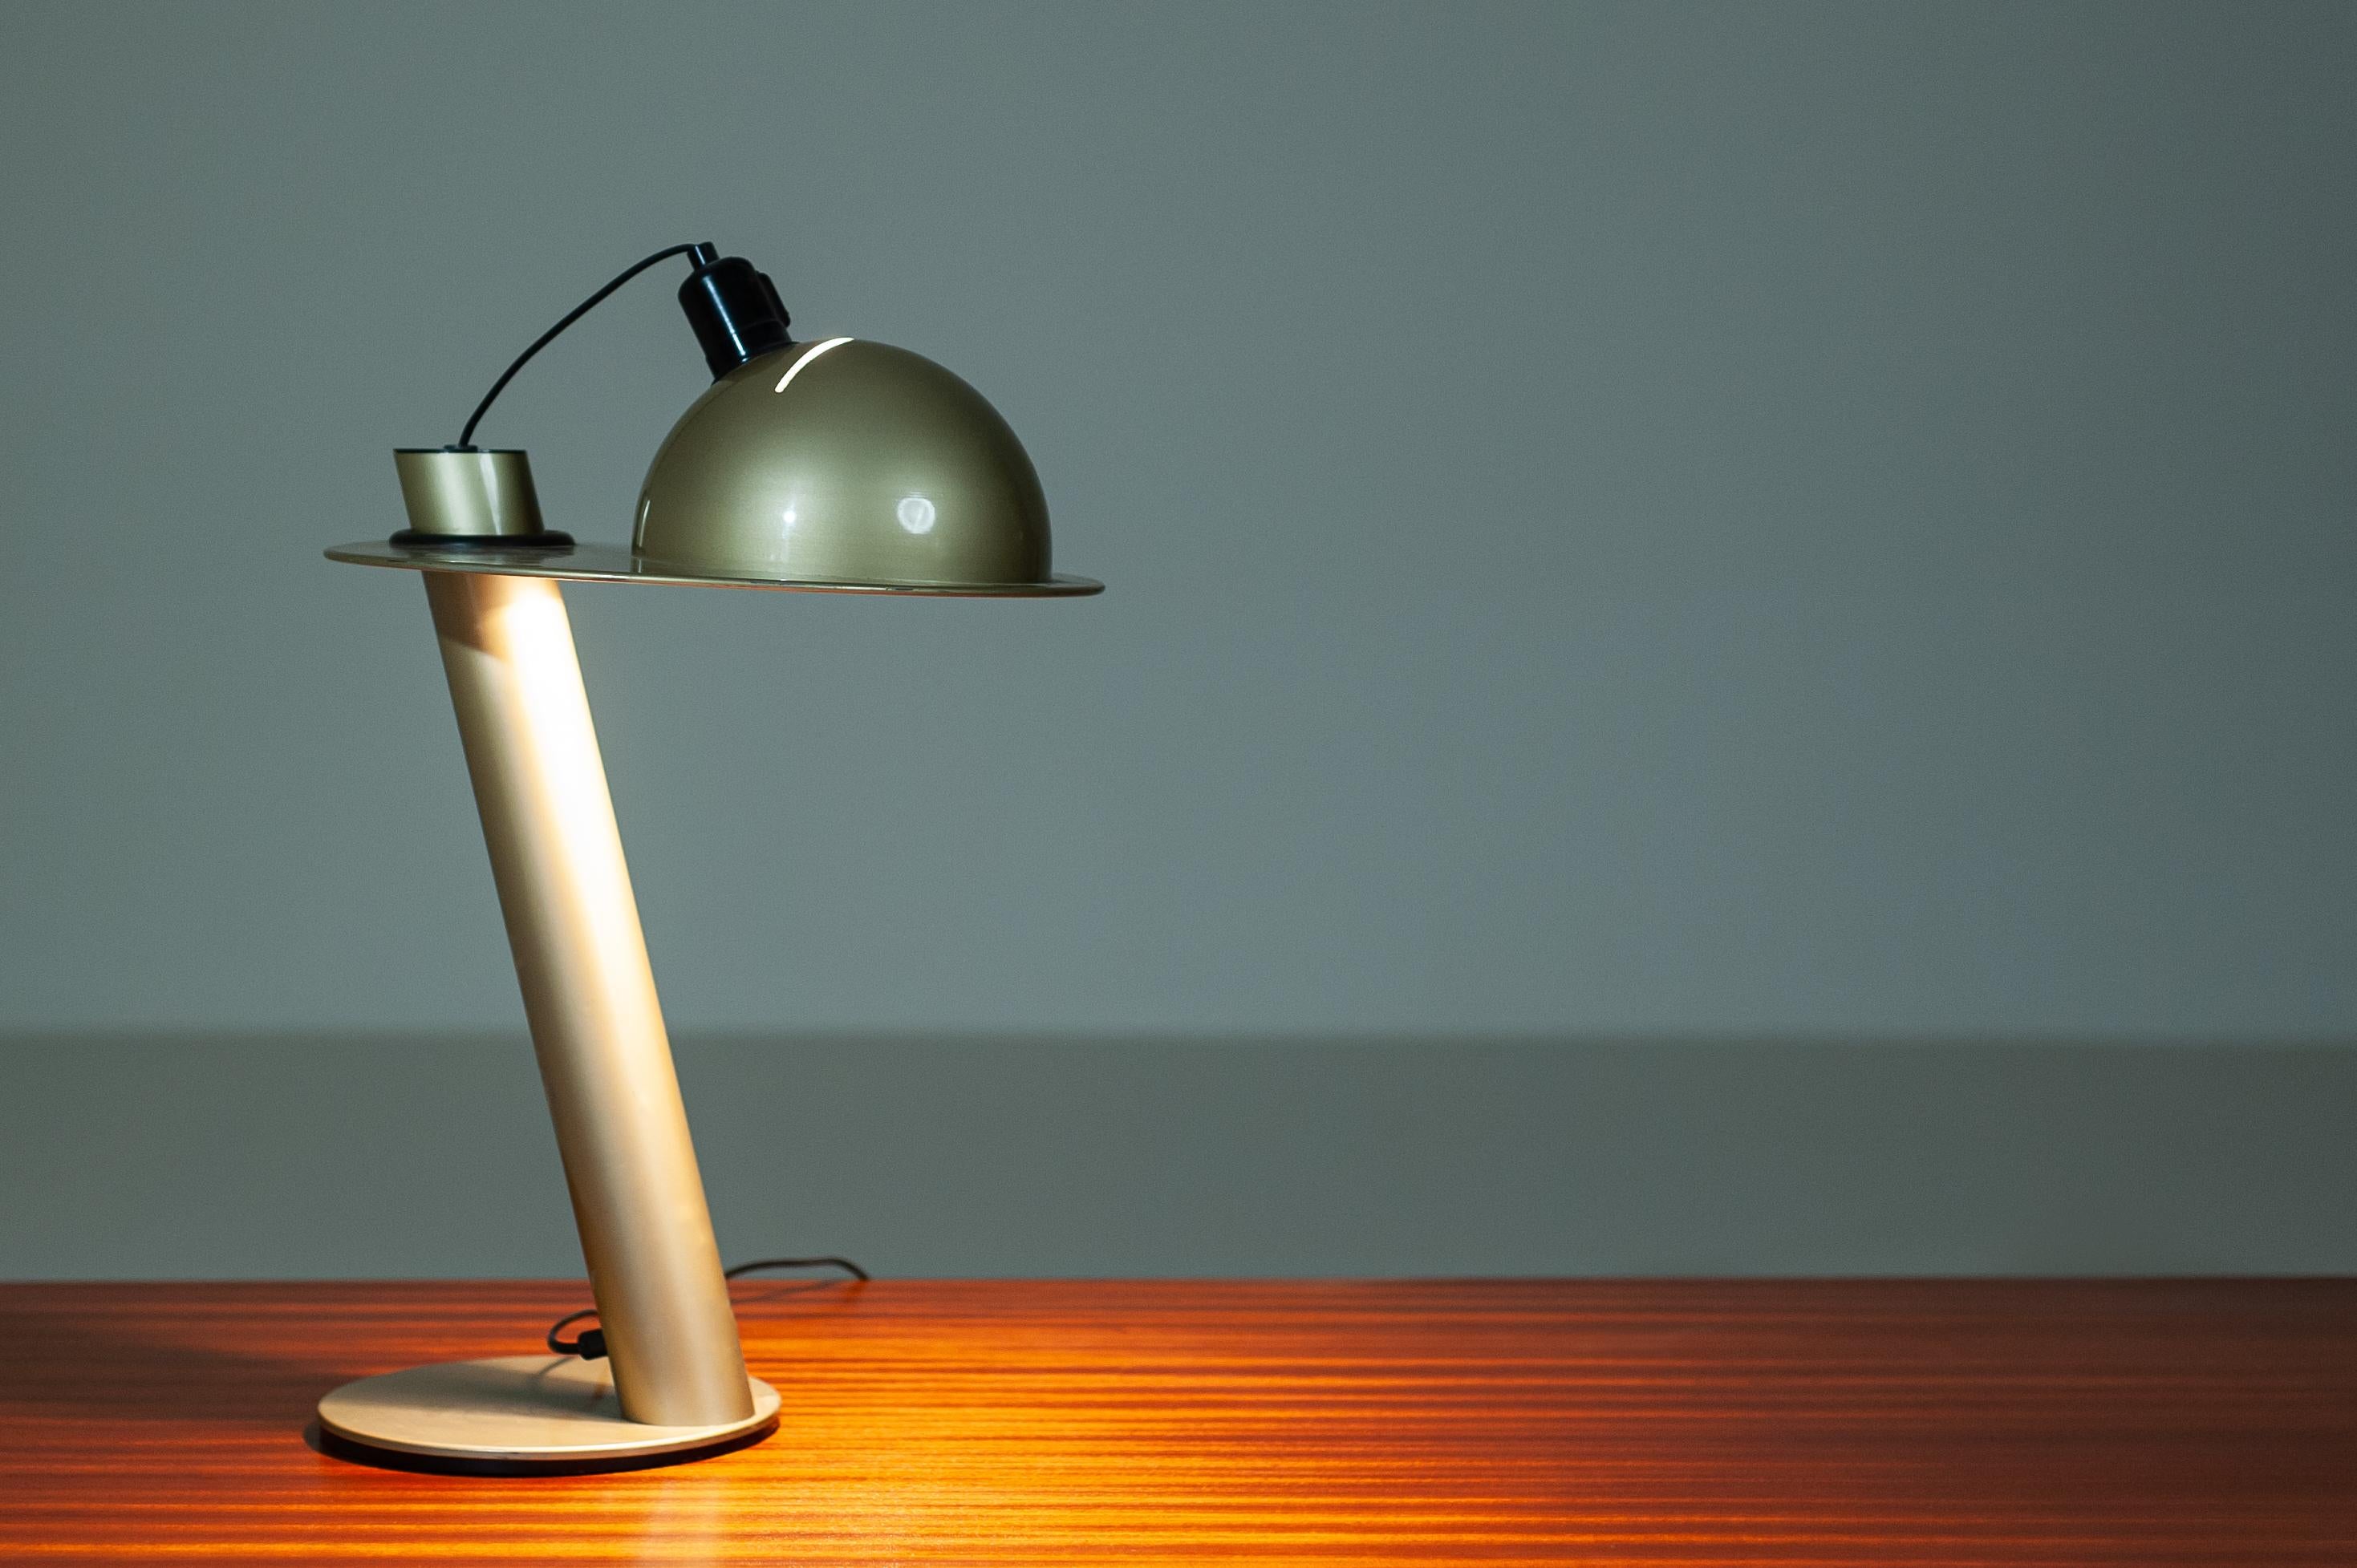 Stilnovo Space Age Adjustable Table Lamp, Metal, Plastic and Rubber, Italy 1970s For Sale 1